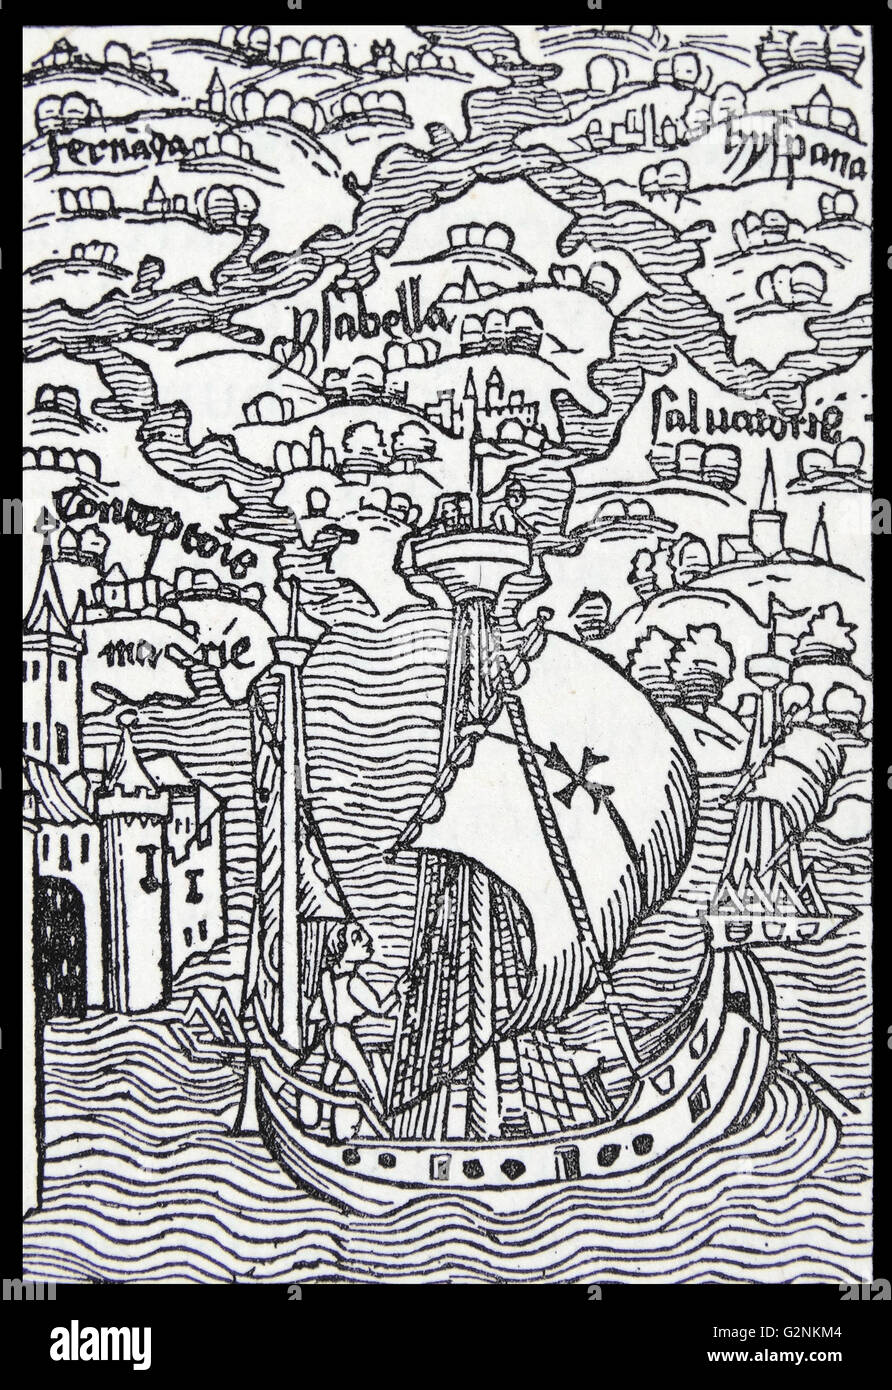 The town of Isabella and the colony founded by Columbus. From a woodcut of 1494. Stock Photo